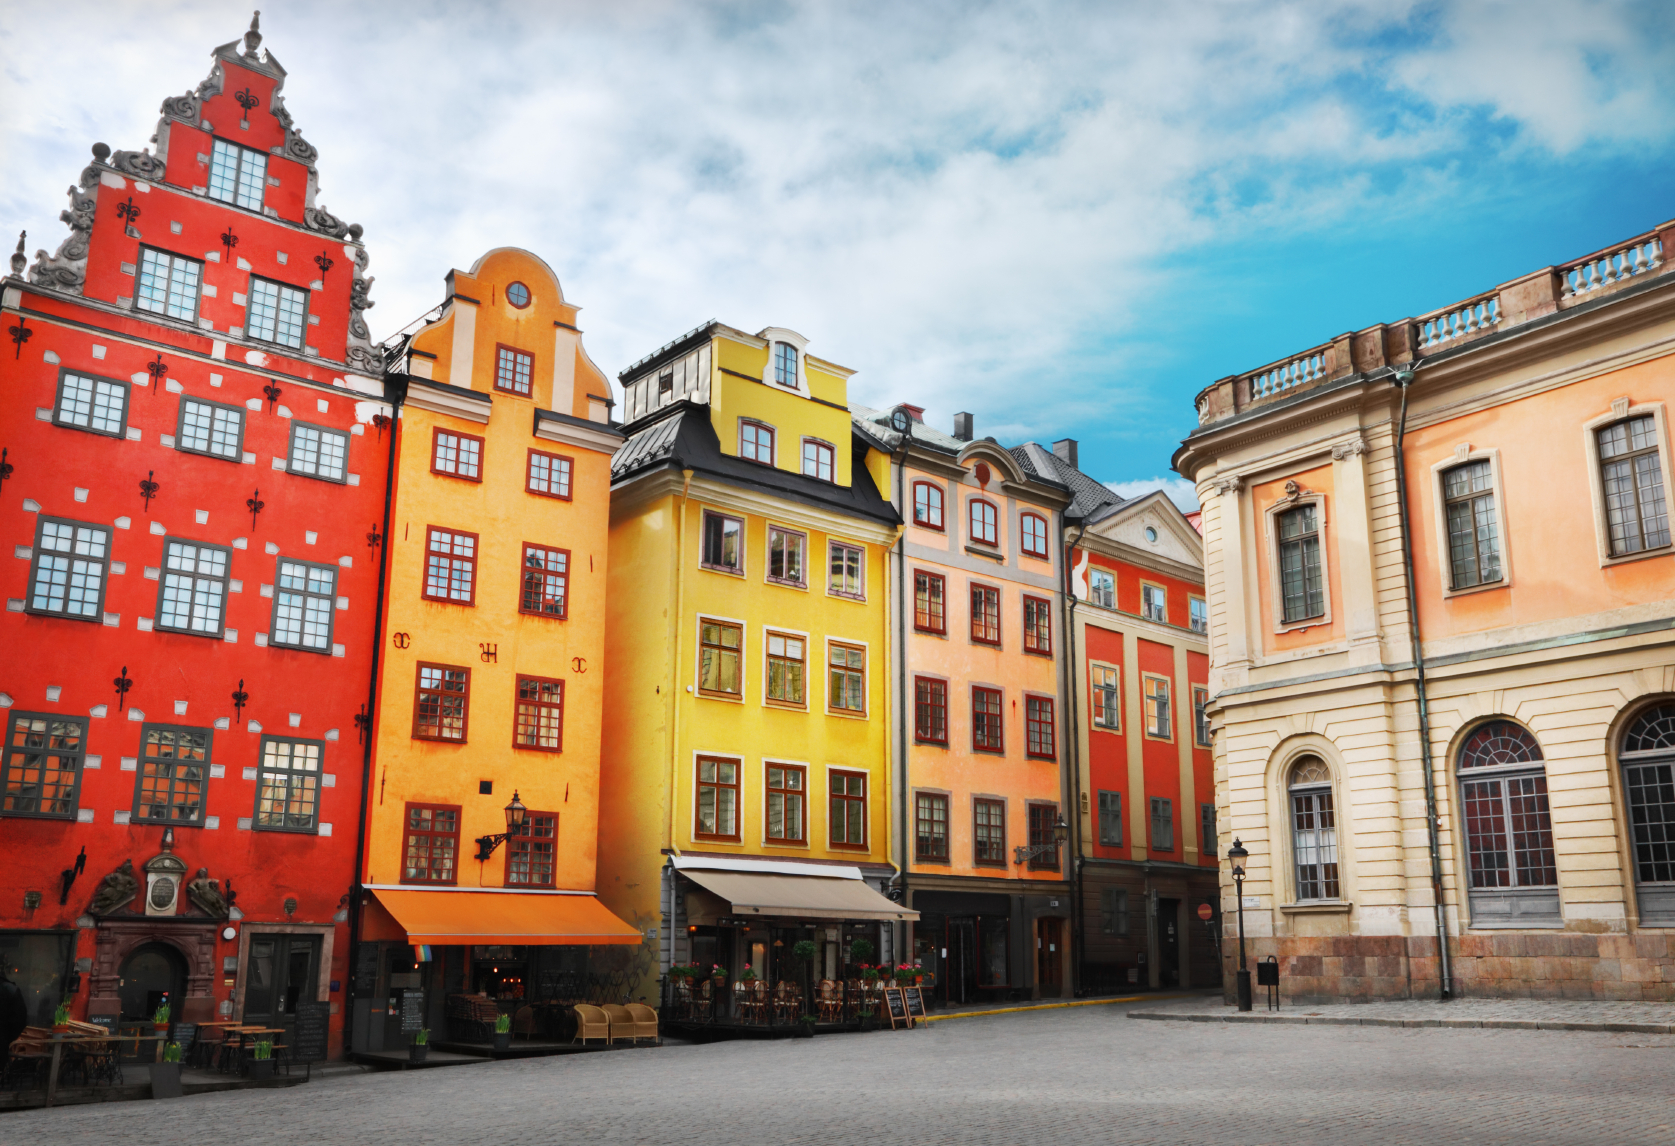 Stockholm's Old Town is shown as vibrant and colorful underneath a blue sky.